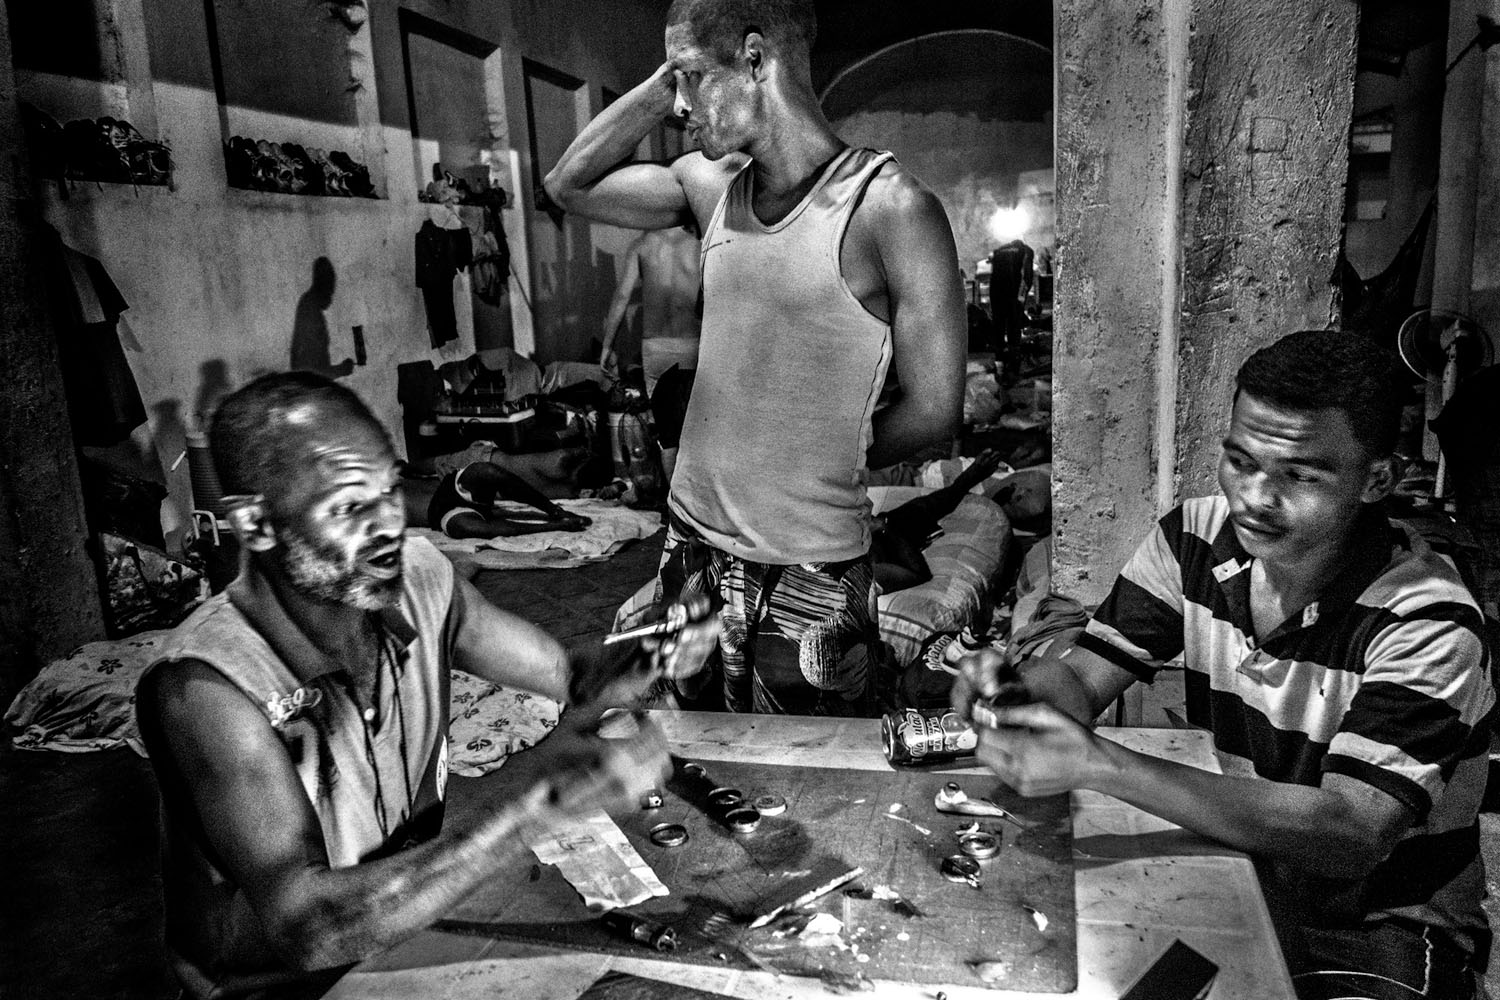 CIUDAD BOLIVAR, VENEZUELA - APRIL 2013: Prisoners preparing pipes used to smoke crack, an addictive and devasting drug derived from cocaine. (Photo by Sebastián Liste/ Reportage by Getty Images)